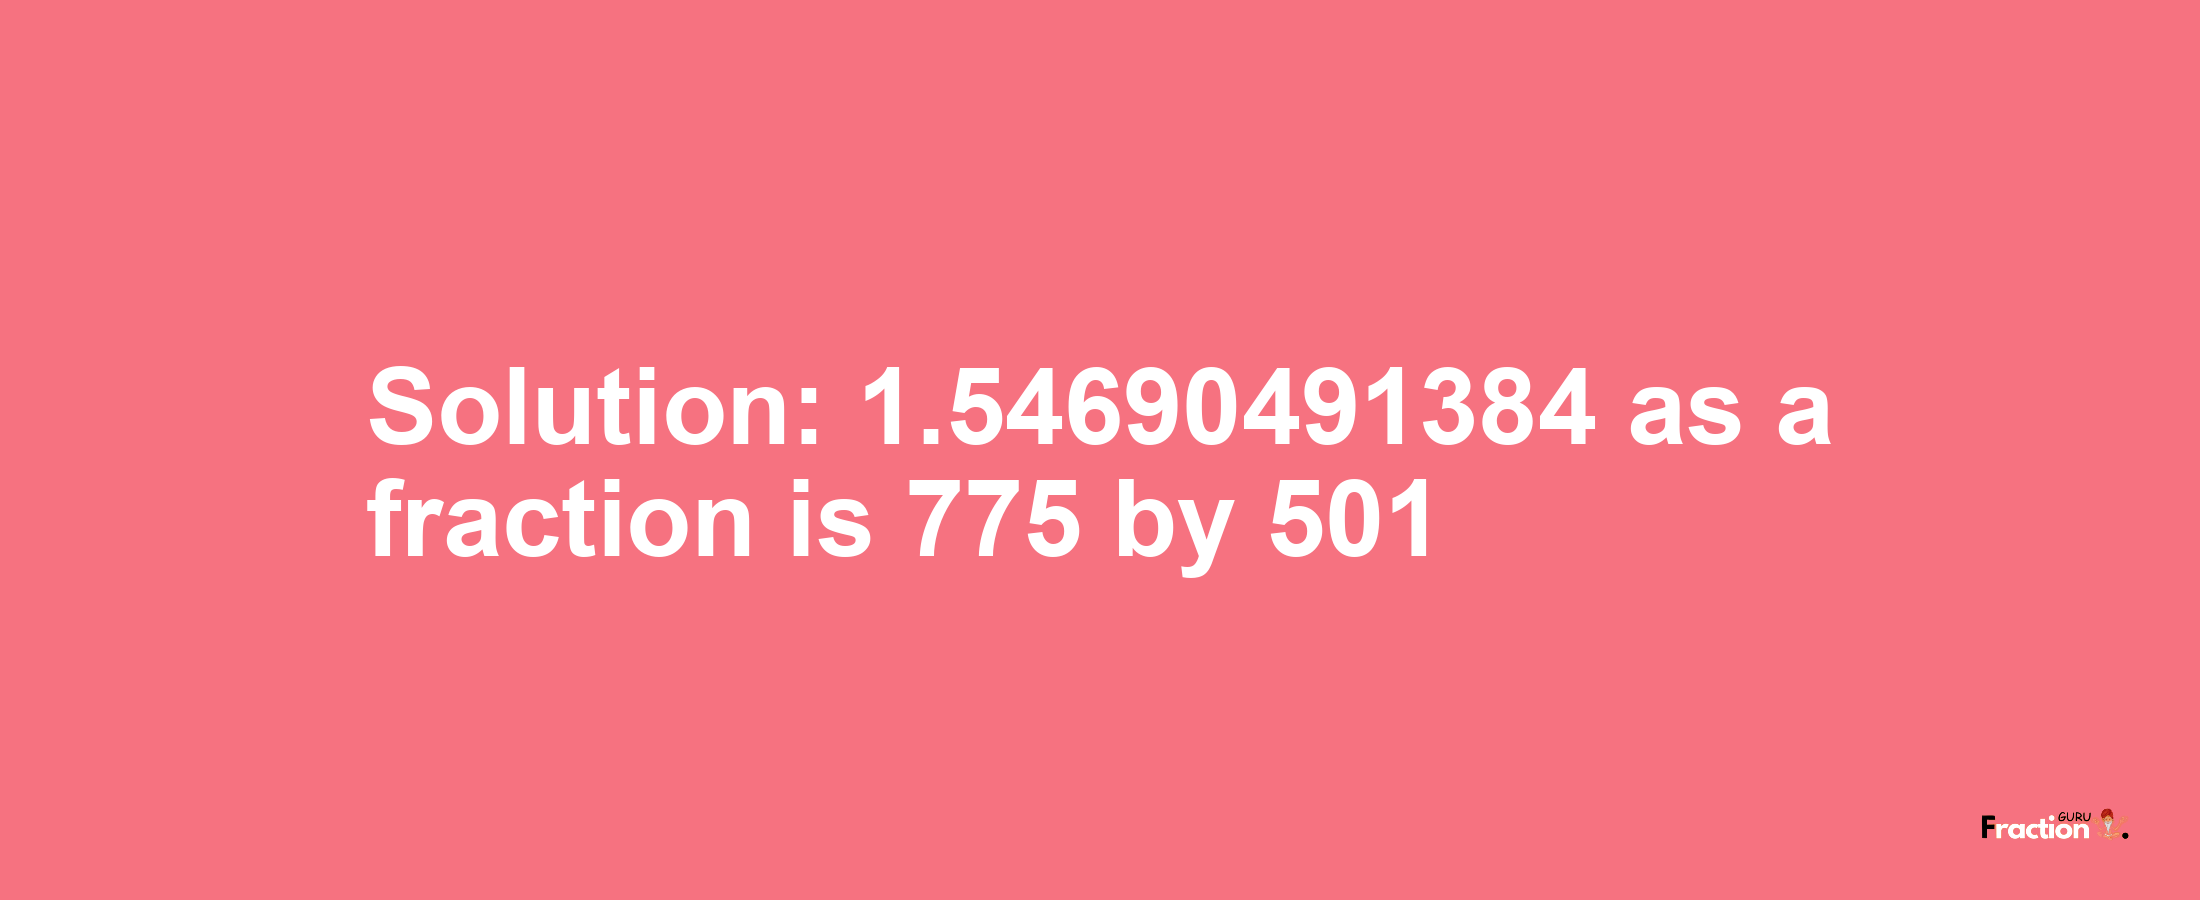 Solution:1.54690491384 as a fraction is 775/501